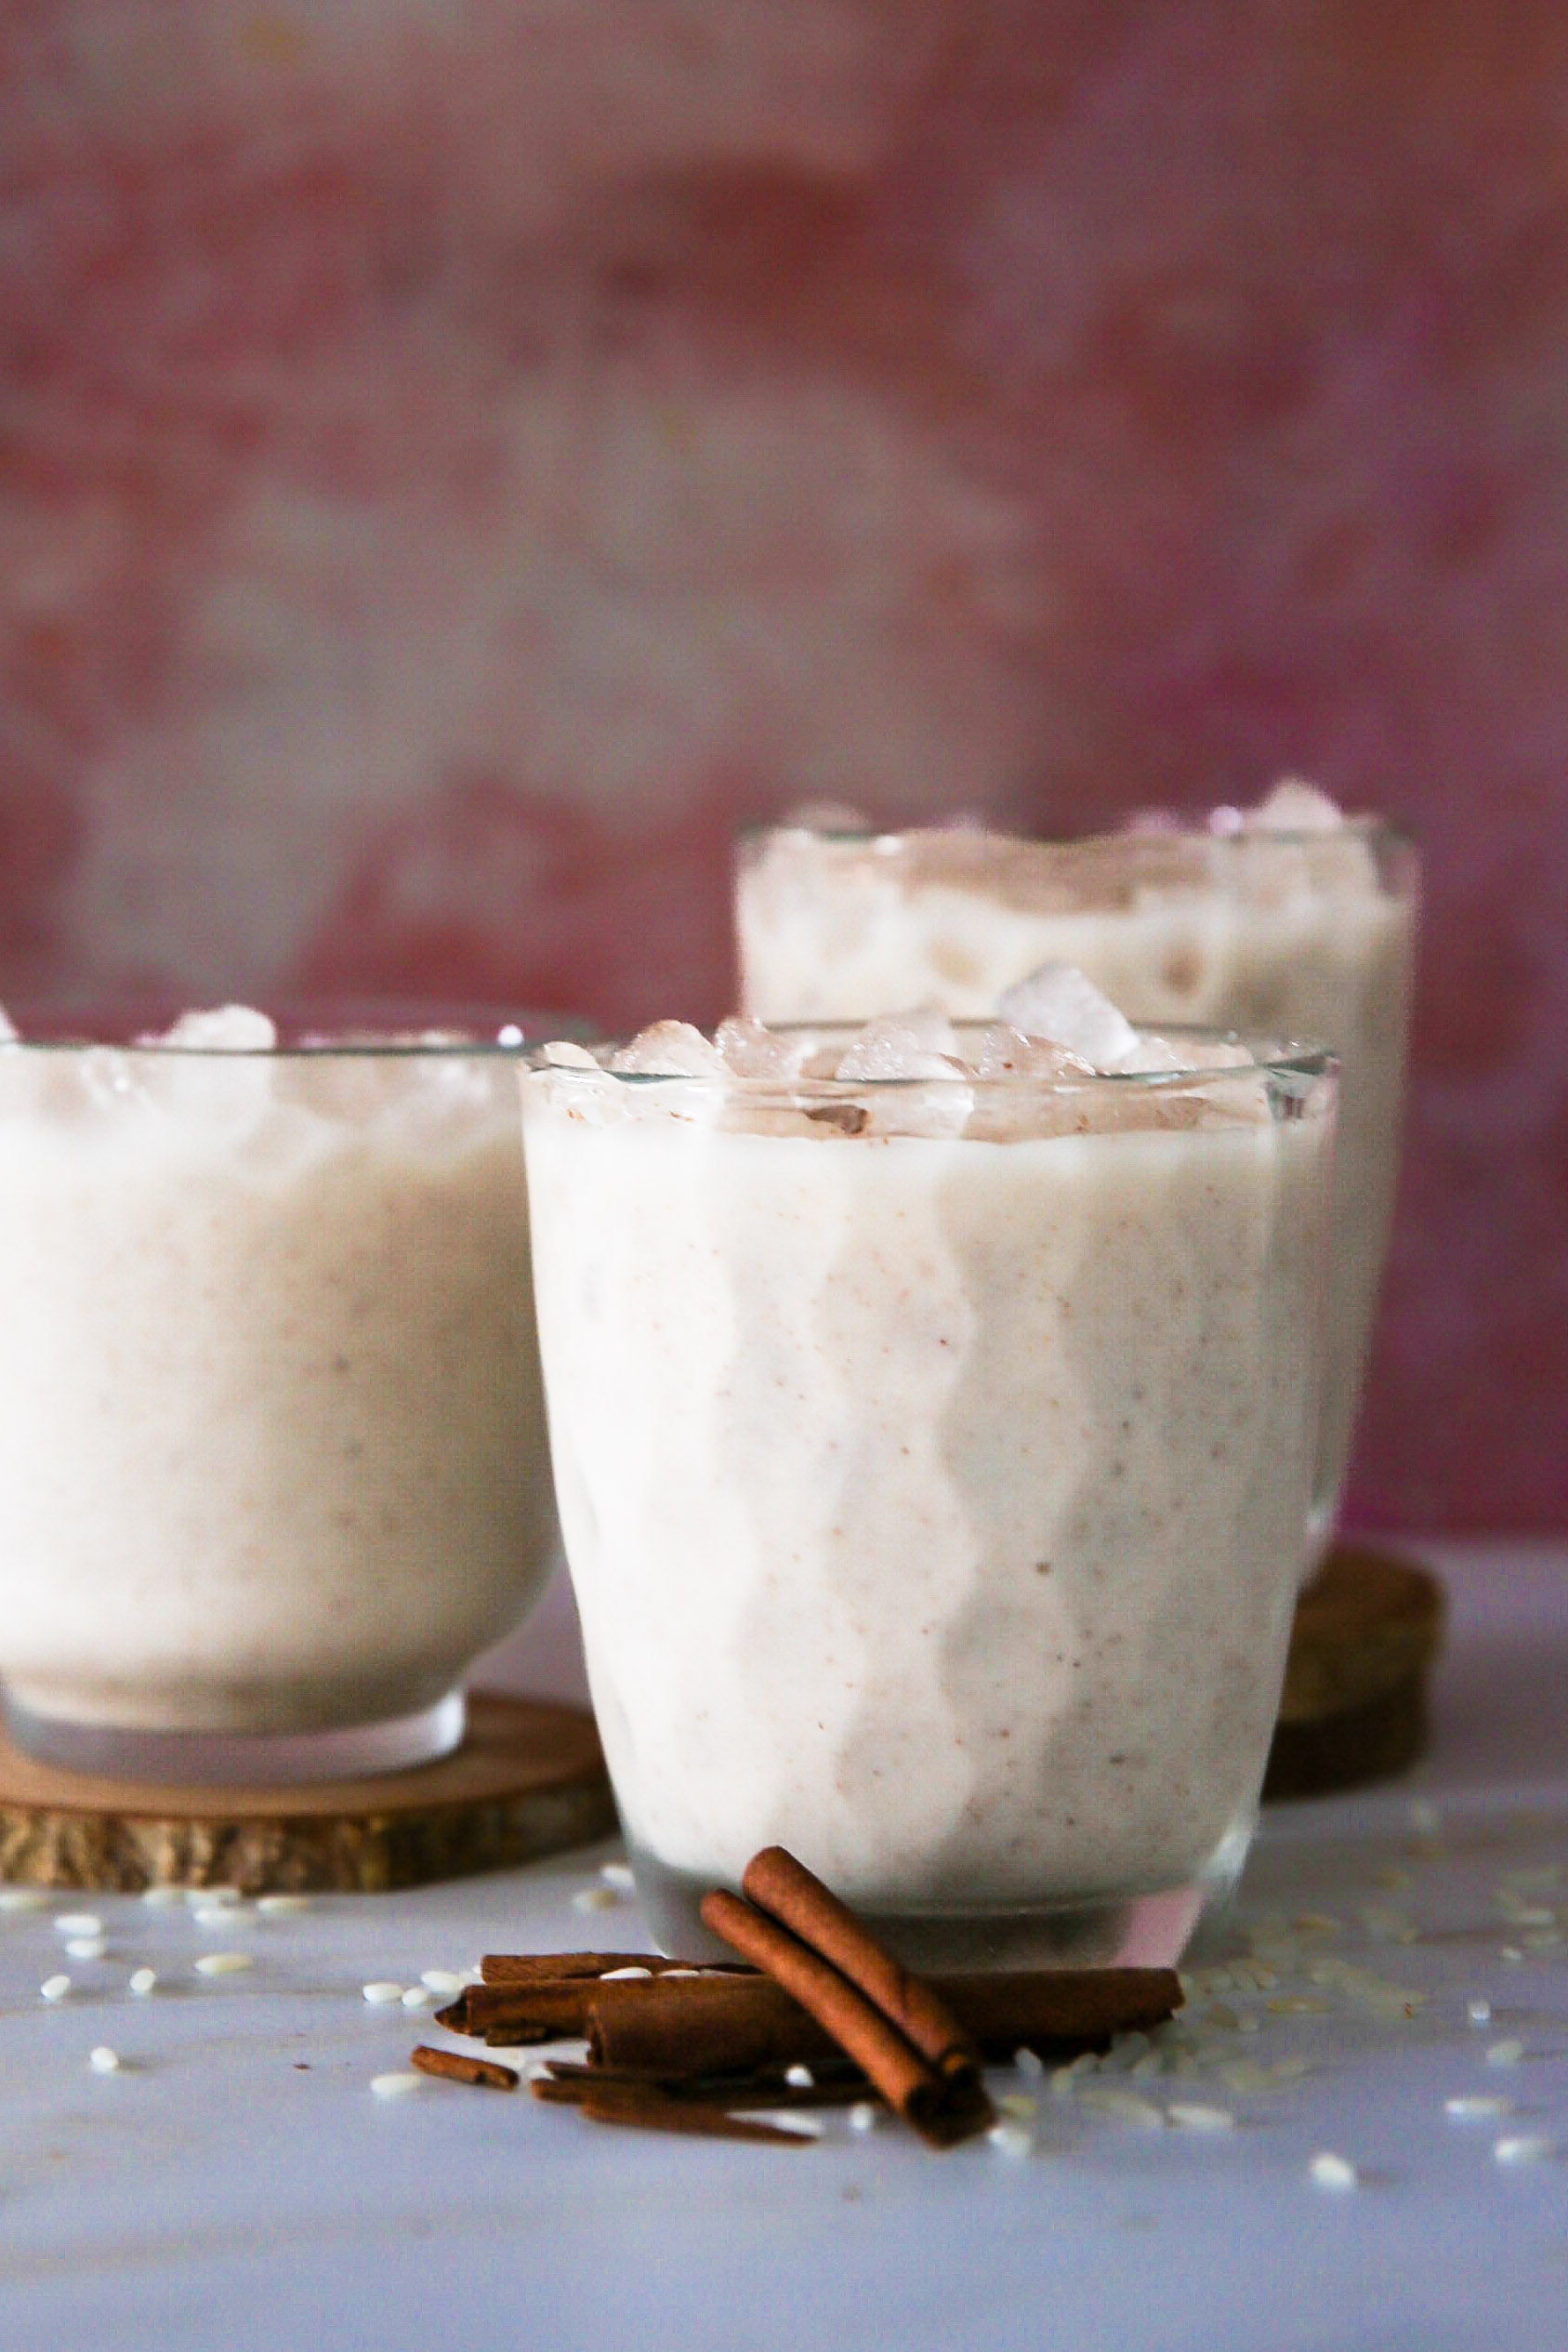 Three glasses of creamy vegan horchata topped with ice cubes, positioned on wooden coasters. The drinks are set against a soft pink background, garnished with cinnamon sticks and scattered rice grains in the